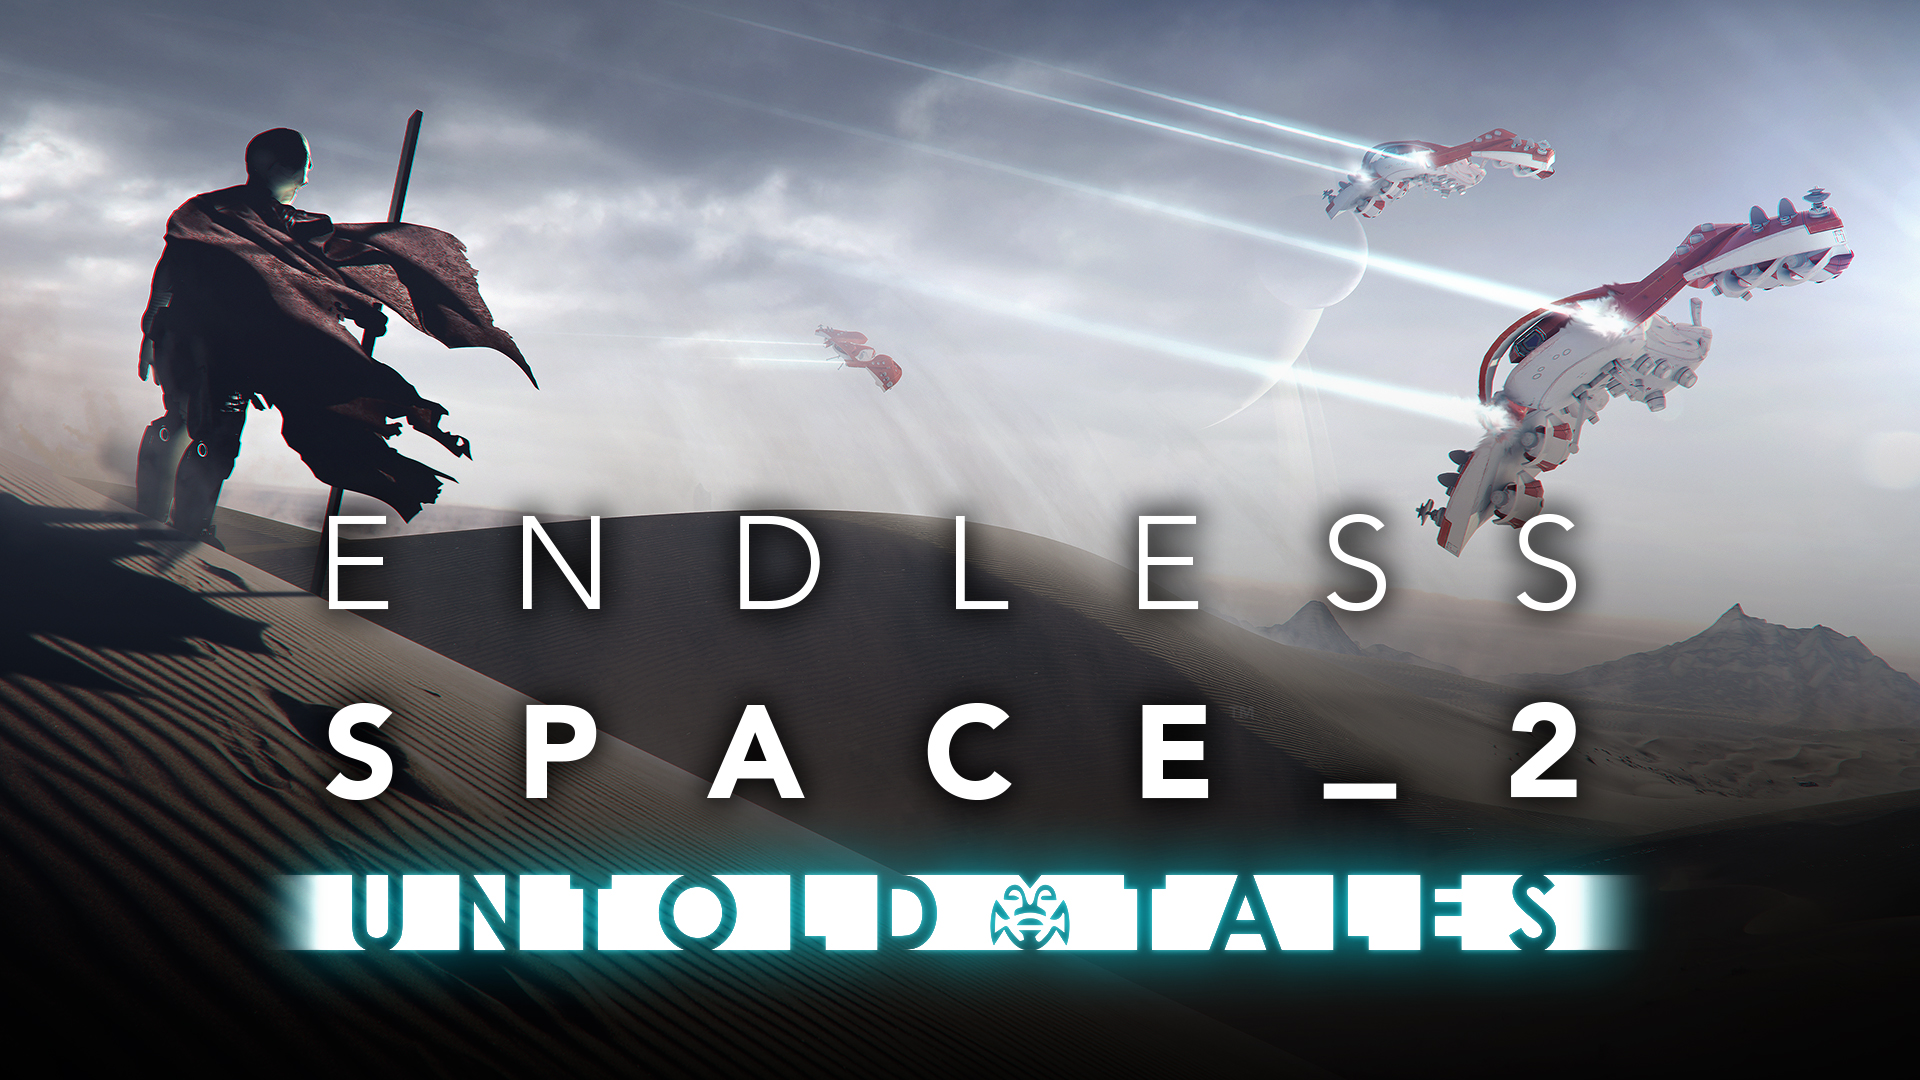 ENDLESS™ Space 2 - Untold Tales Featured Screenshot #1